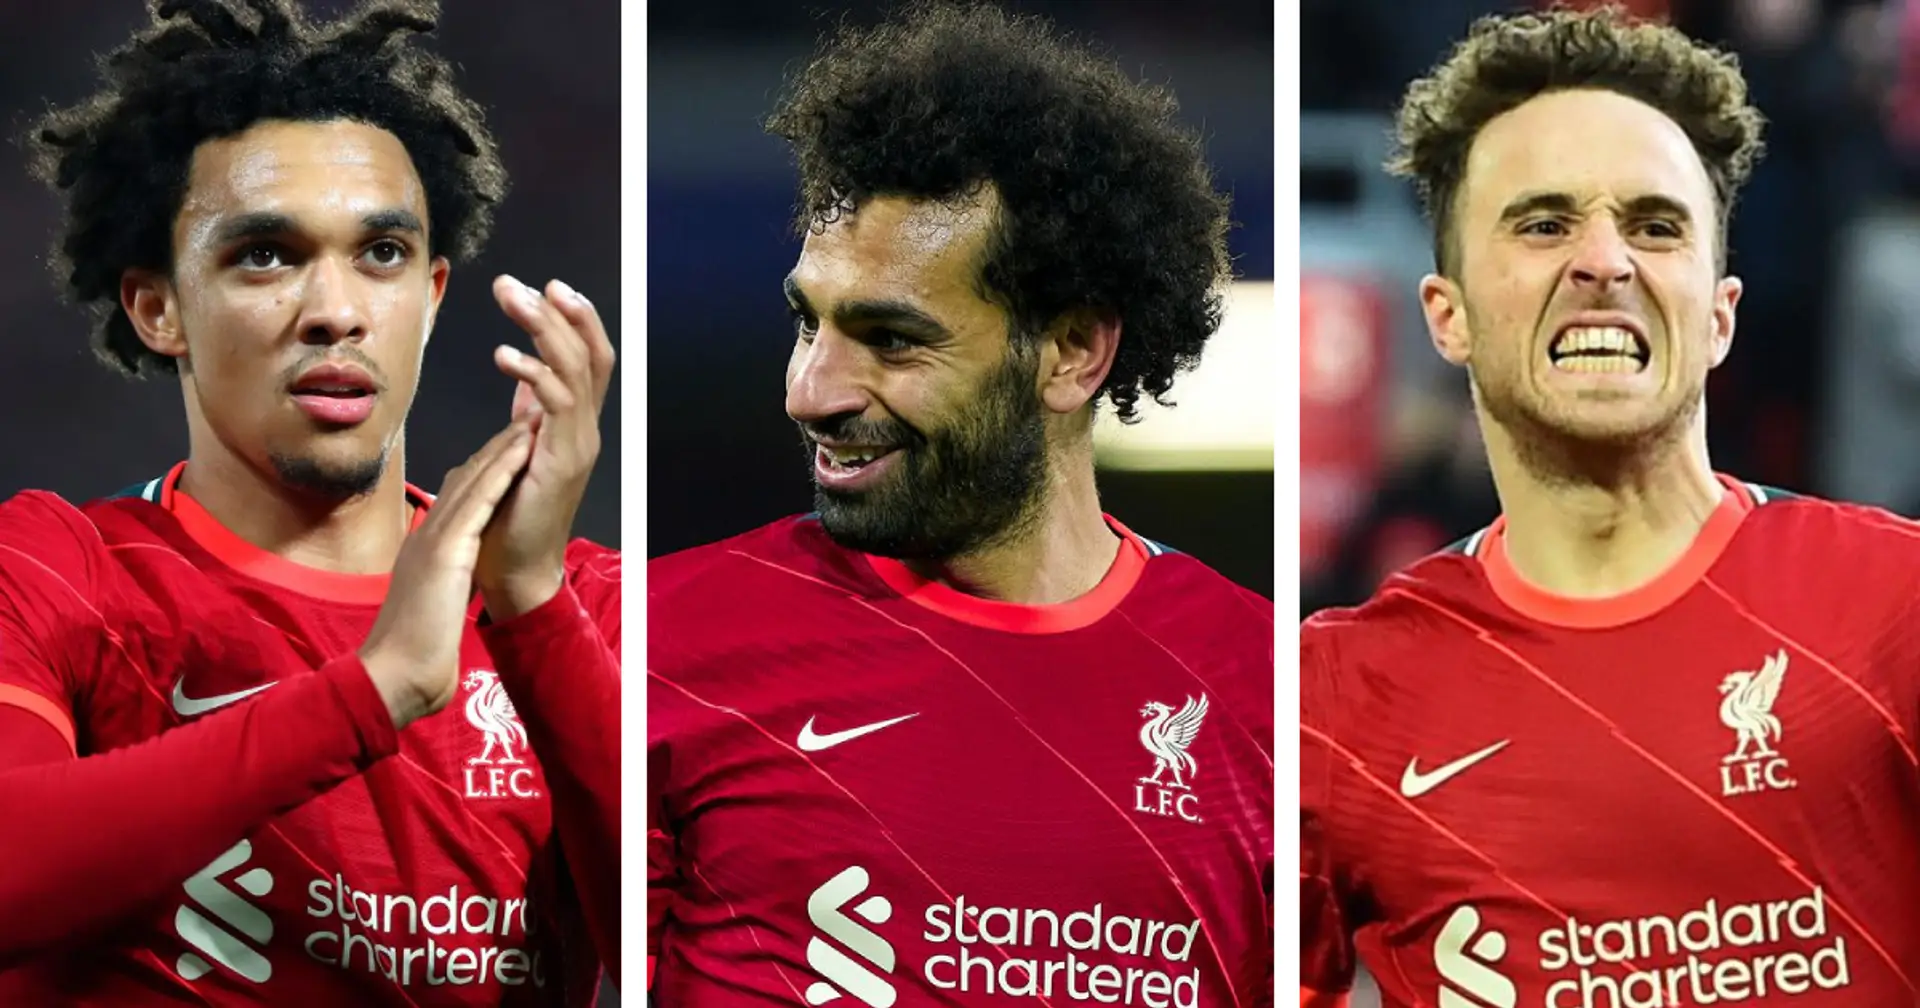 'Only comes down to them': LFC fan names 2 main candidates for Player of the Month, leaves out Salah